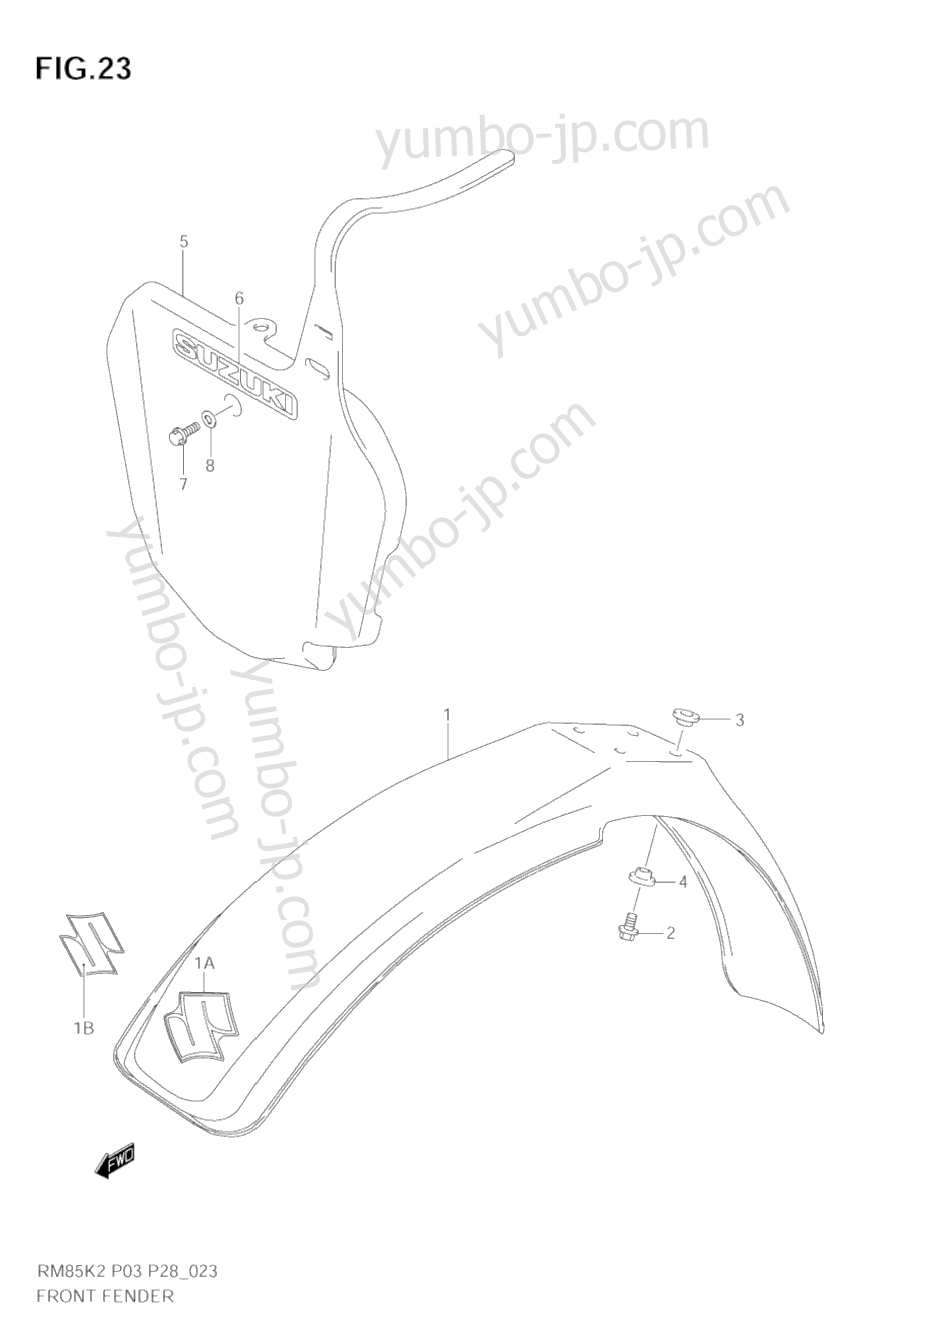 FRONT FENDER for motorcycles SUZUKI RM85 2003 year